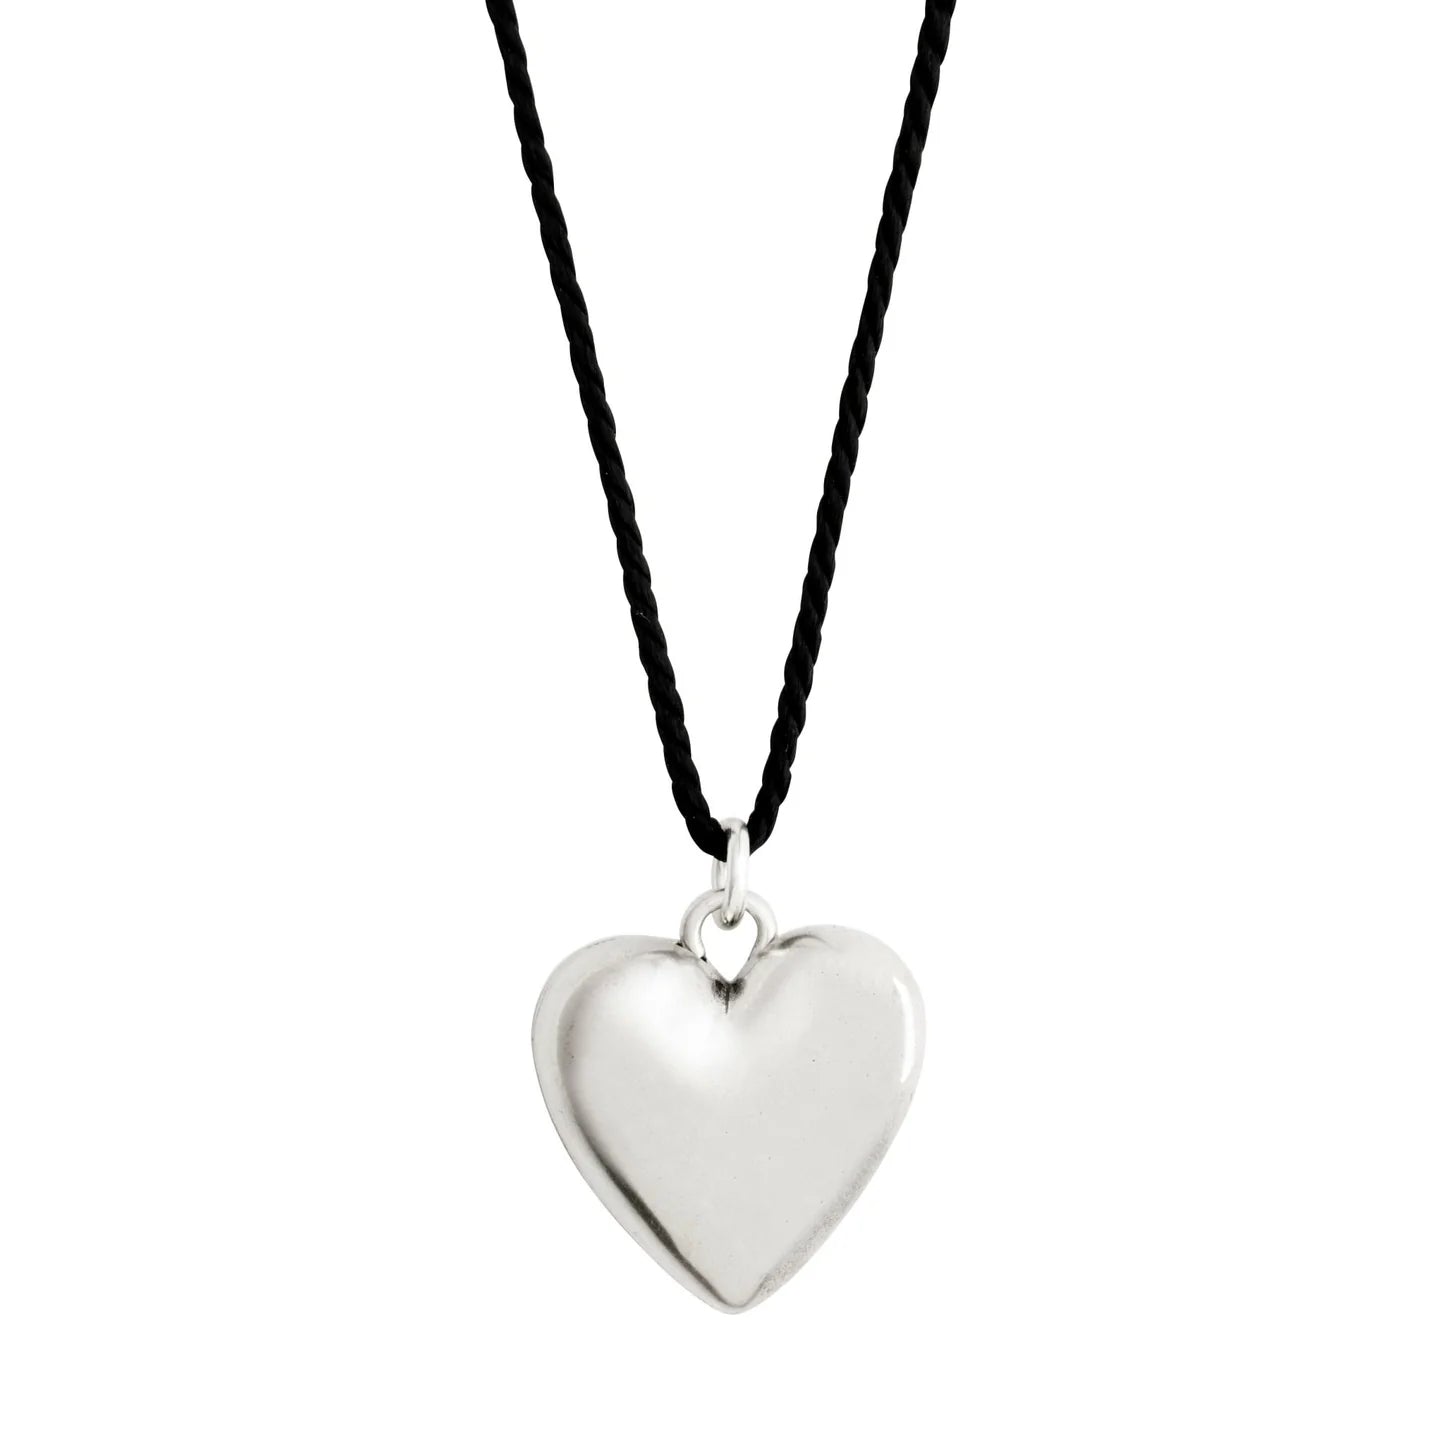 Reflect Heart Necklace-Silver